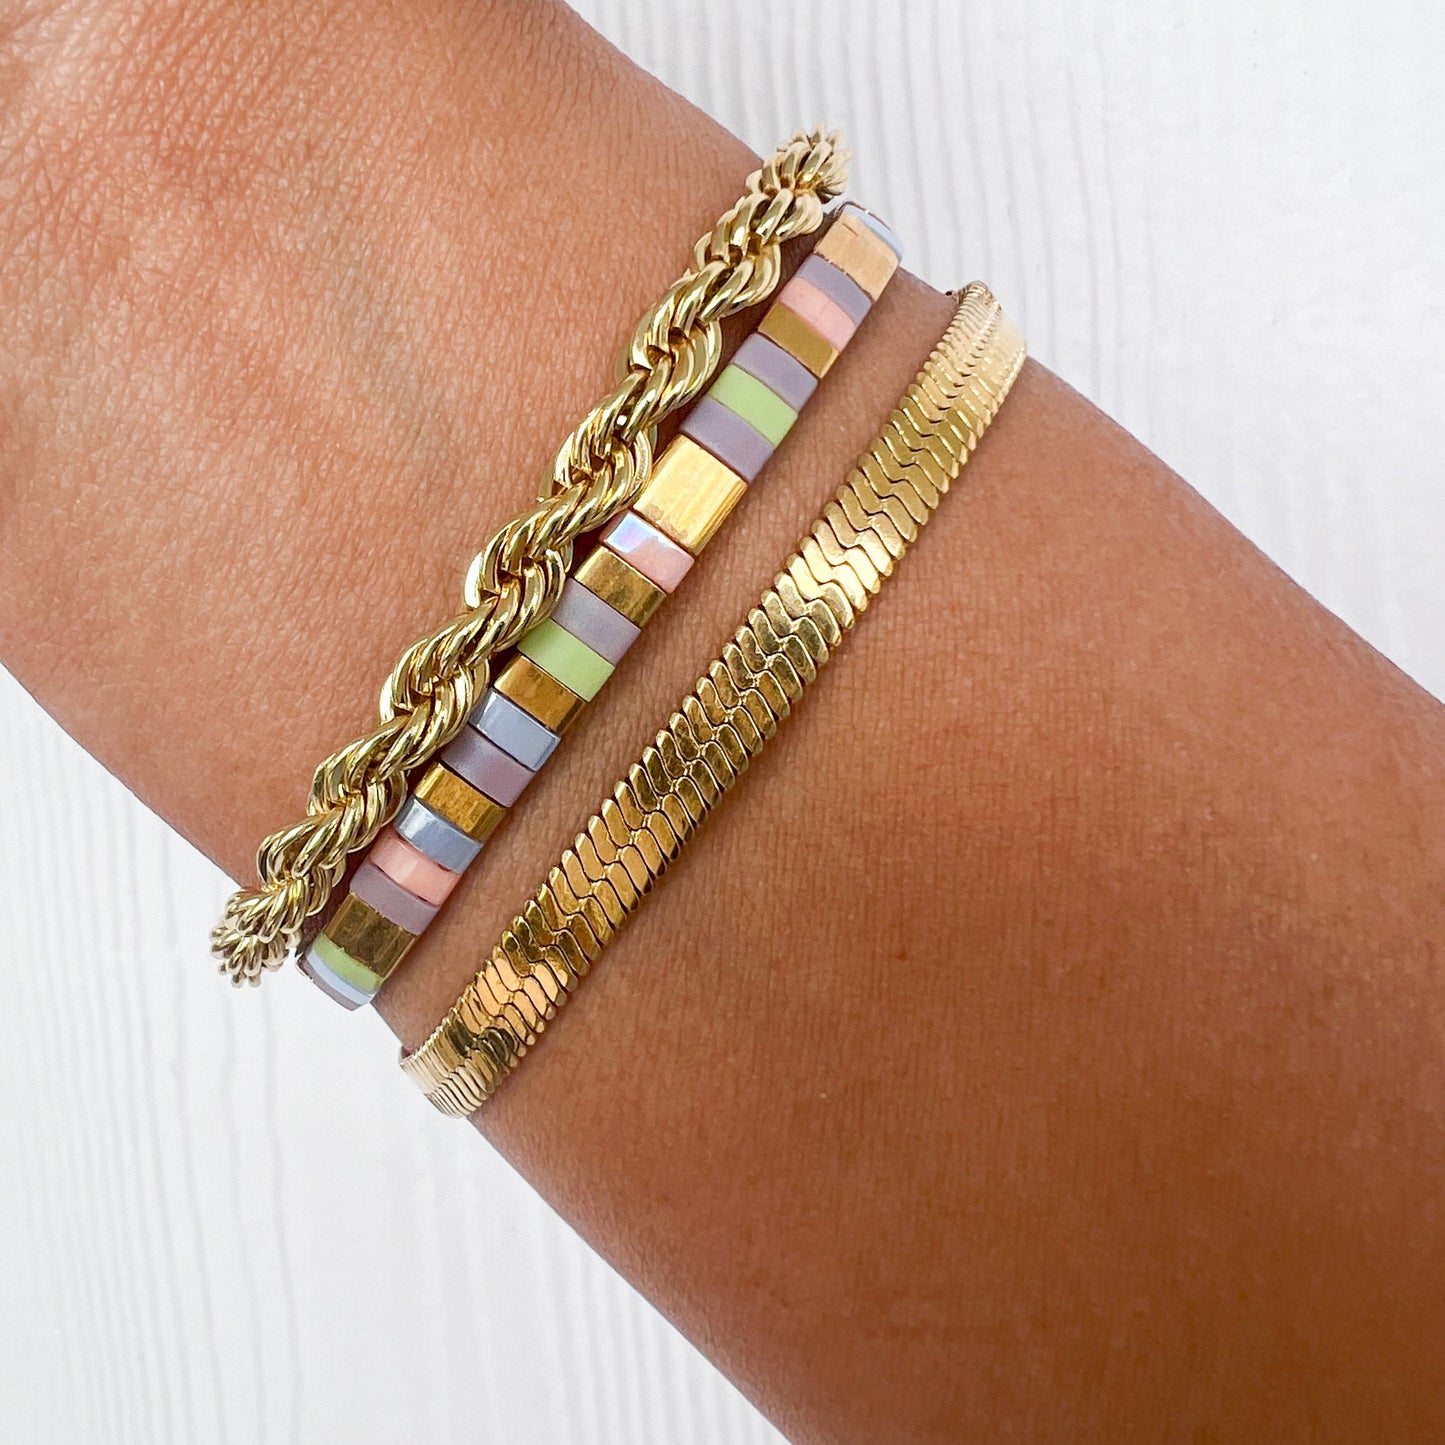 Bracelet of the Month - The Aria